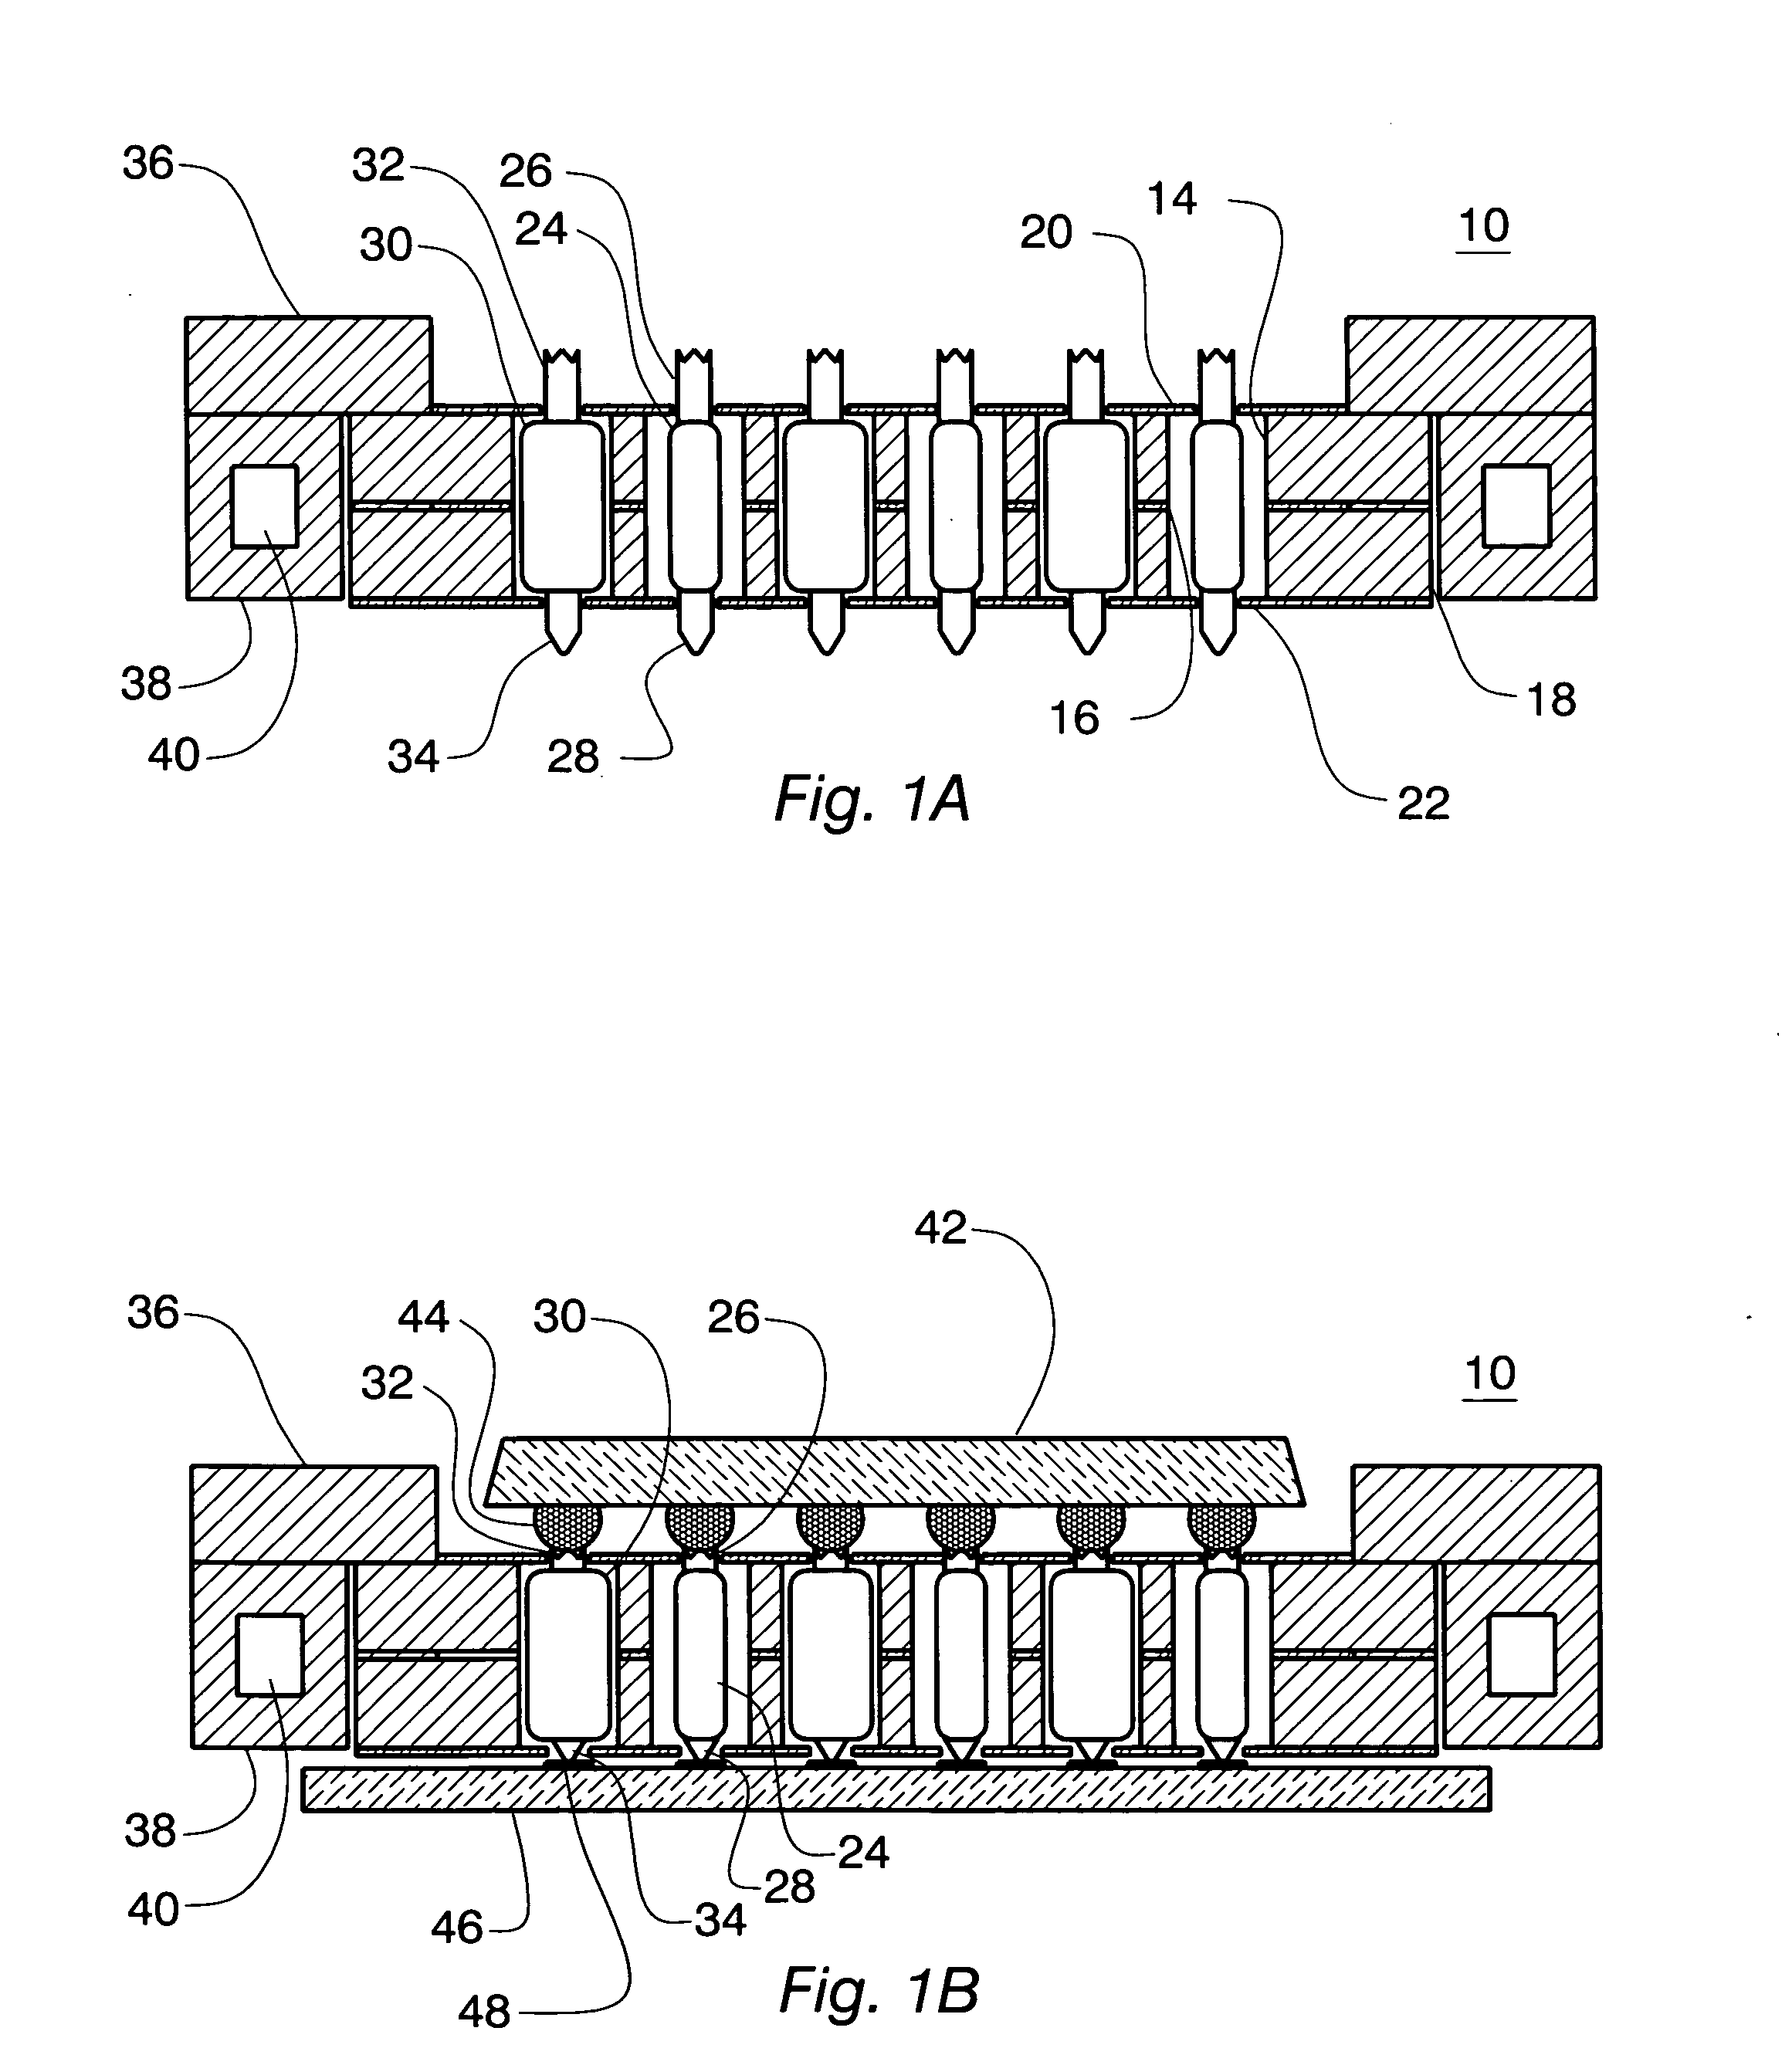 Socket for an electronic device